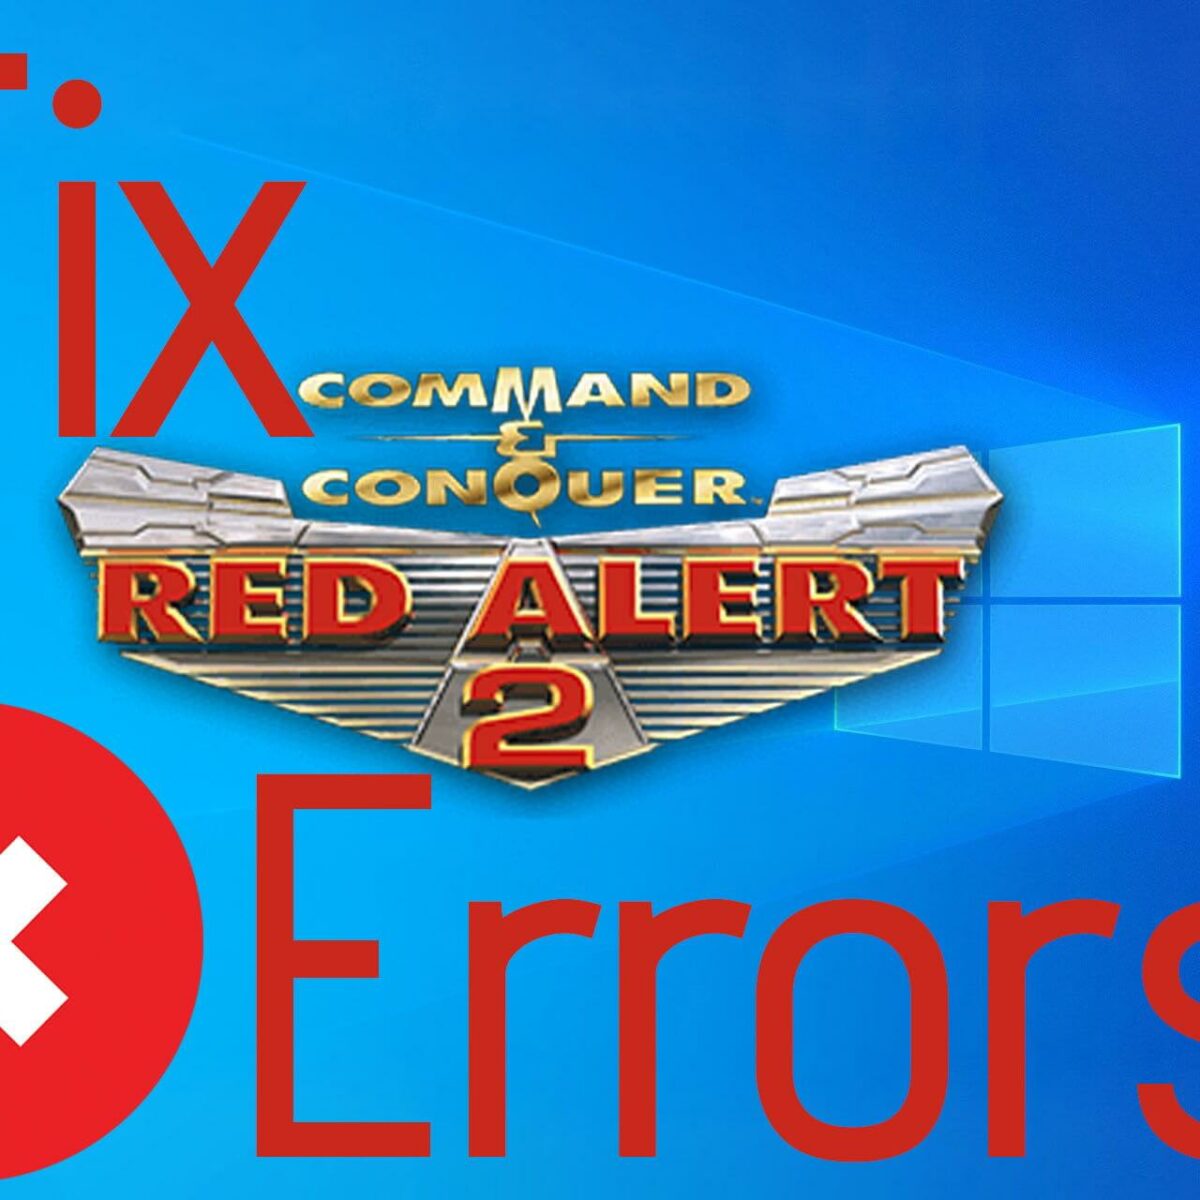 How to fix Alert 2 issues in Windows 10/11